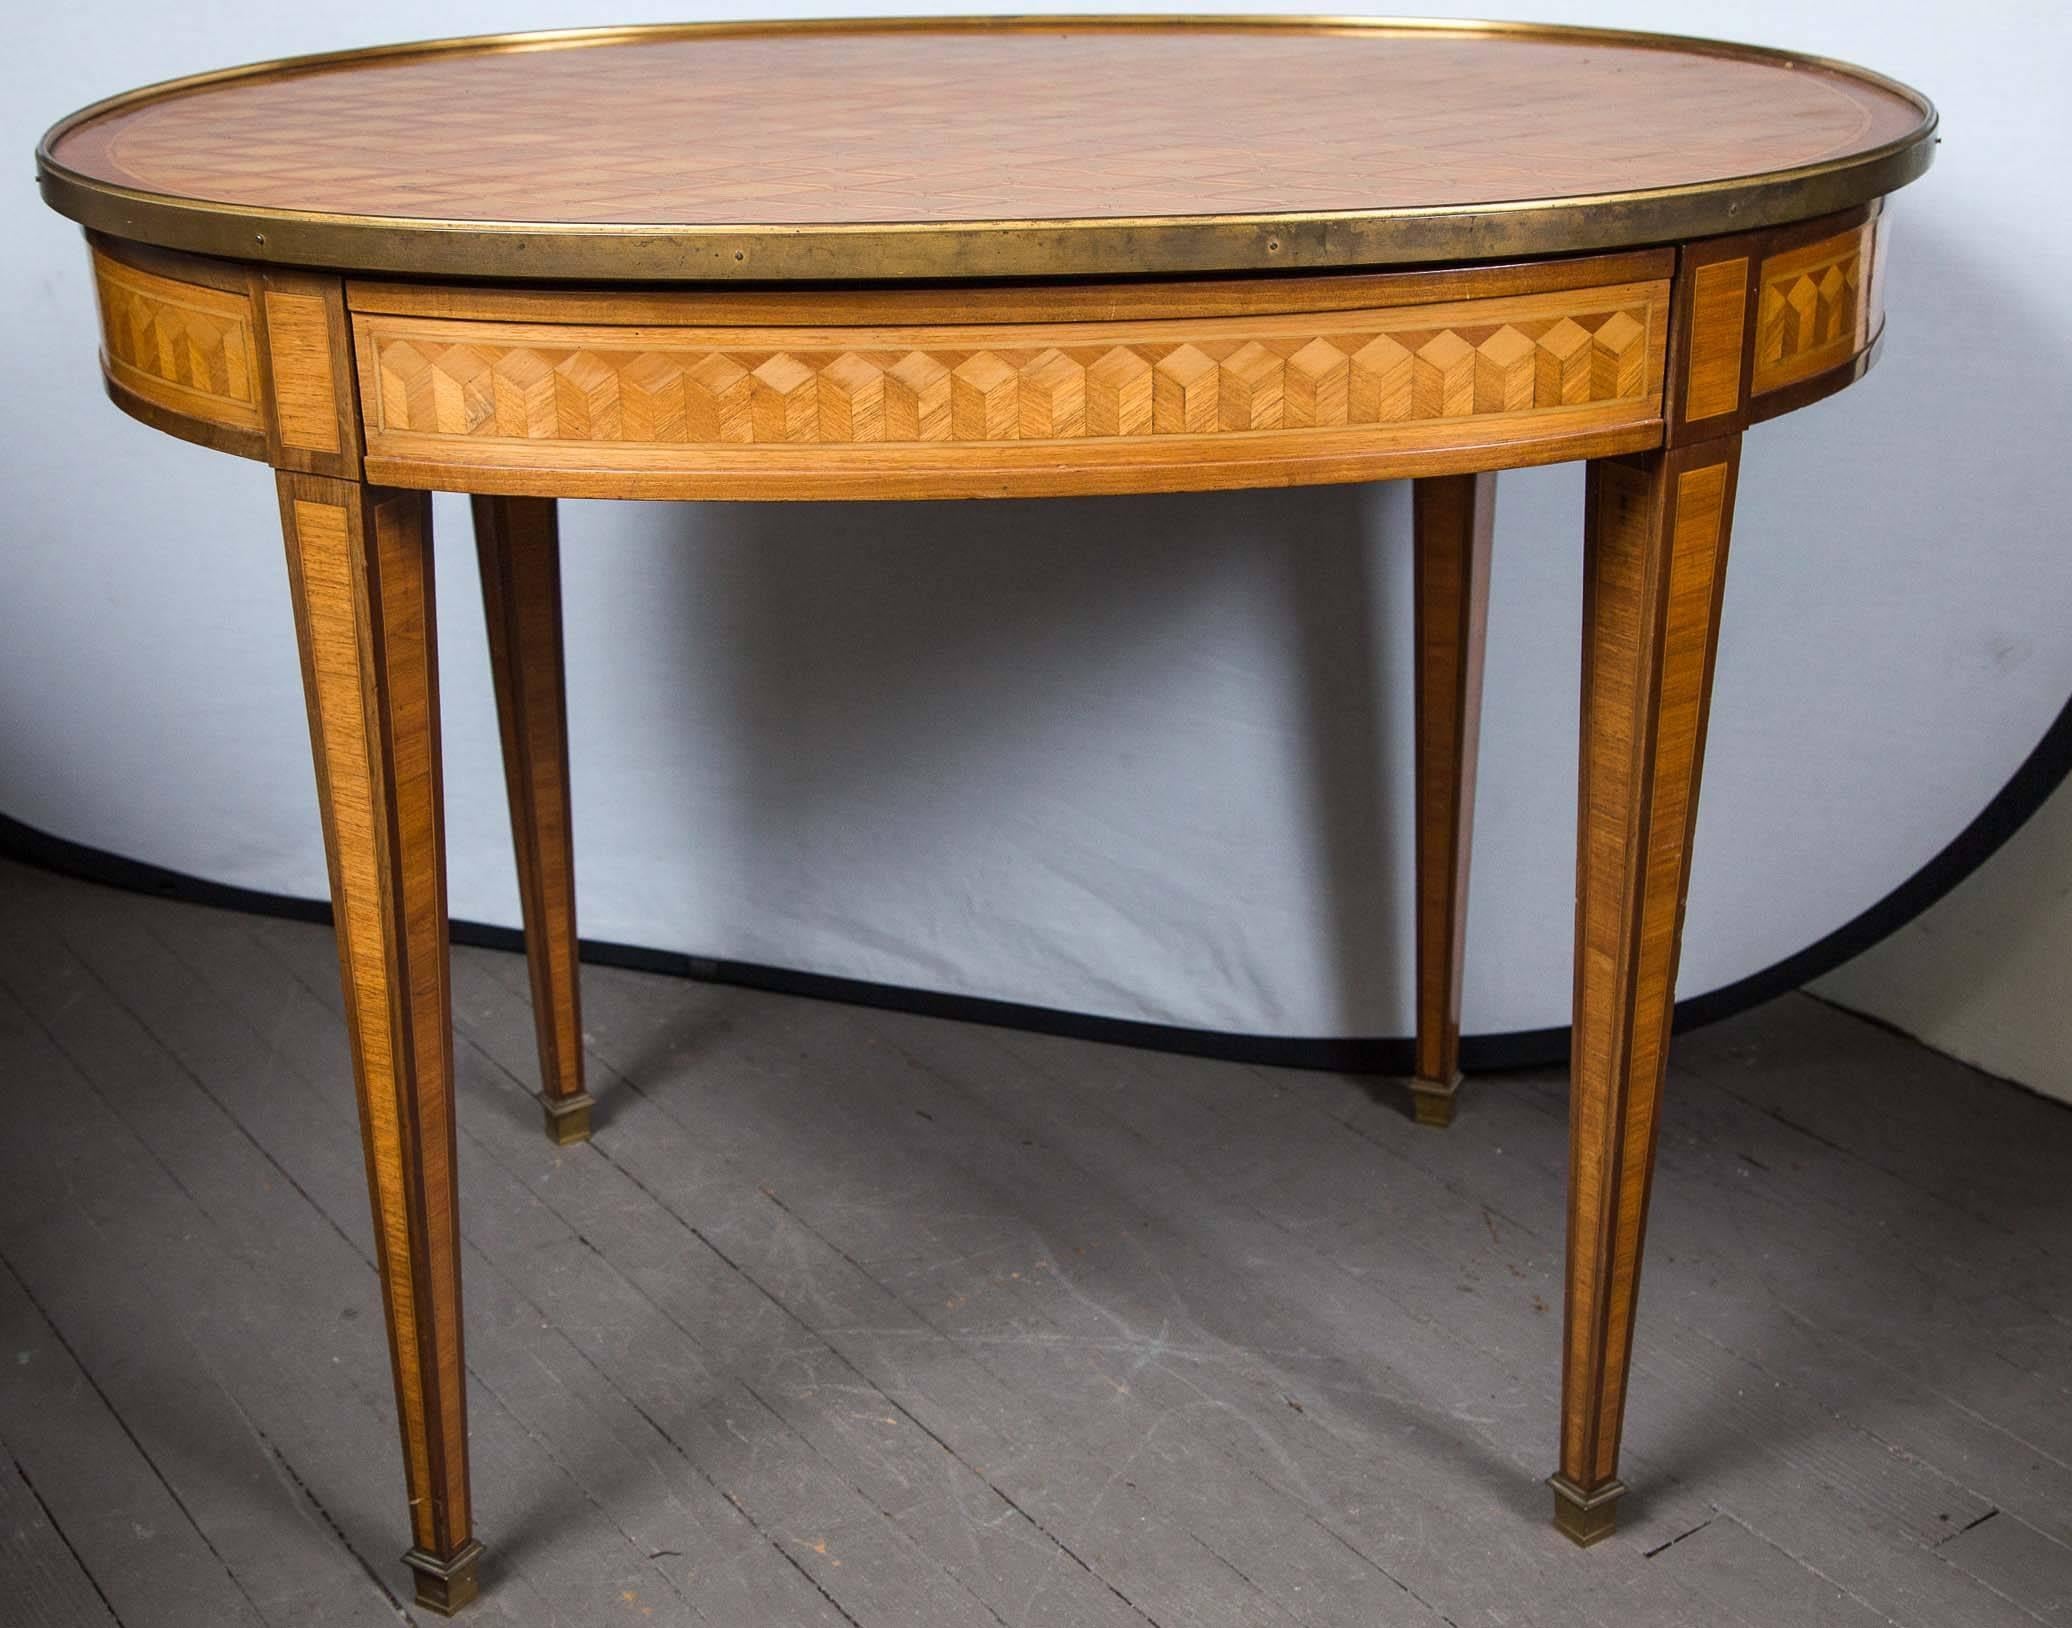 The oval brass edged top of cross hatched parquetry, the apron of tromp l'oeil marquetry. A single drawer in the apron.
Raised on squared tapered legs ending in brass sabot caps.